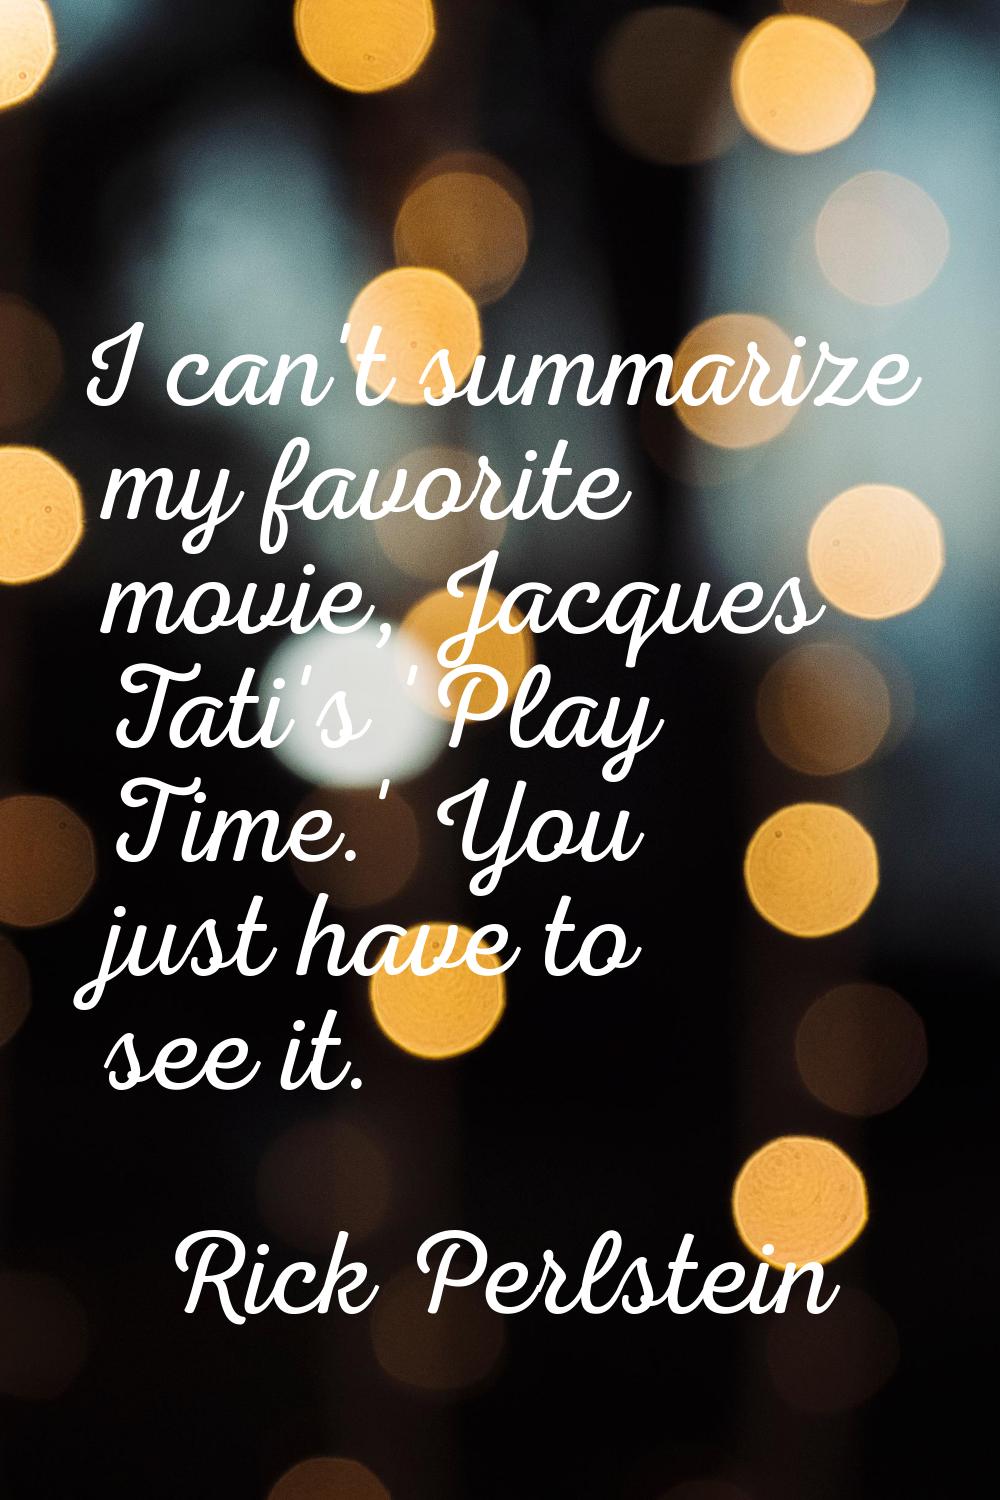 I can't summarize my favorite movie, Jacques Tati's 'Play Time.' You just have to see it.